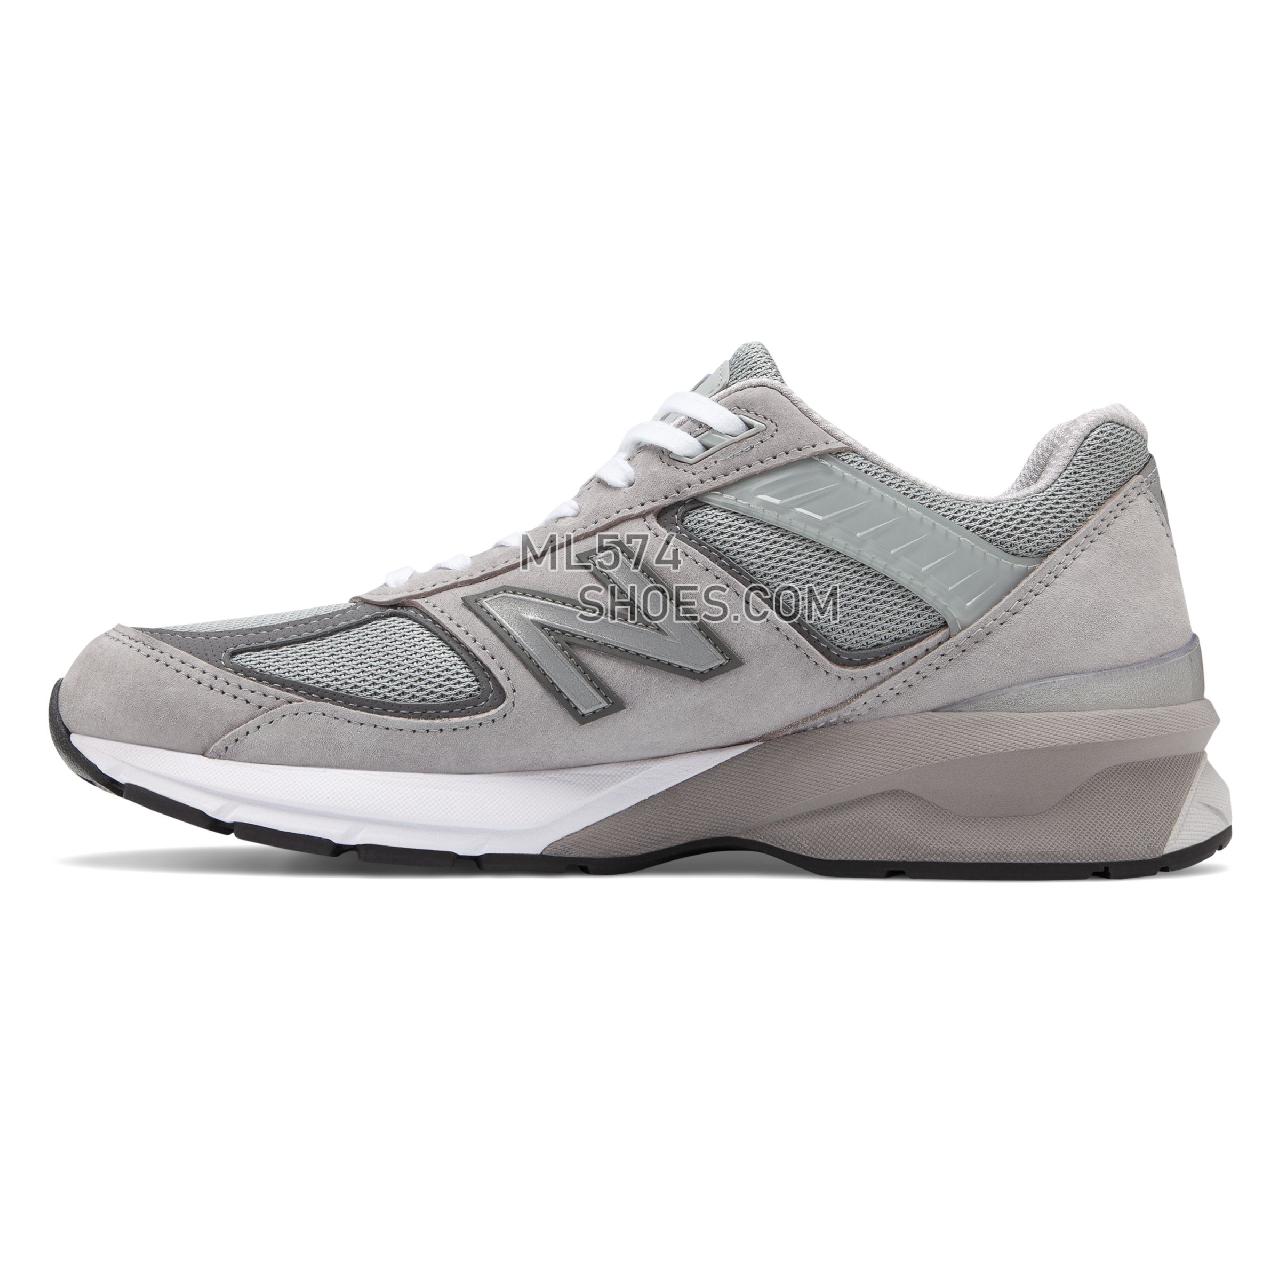 New Balance 990v5 Made in US - Men's Neutral Running - Grey with Castlerock - M990GL5